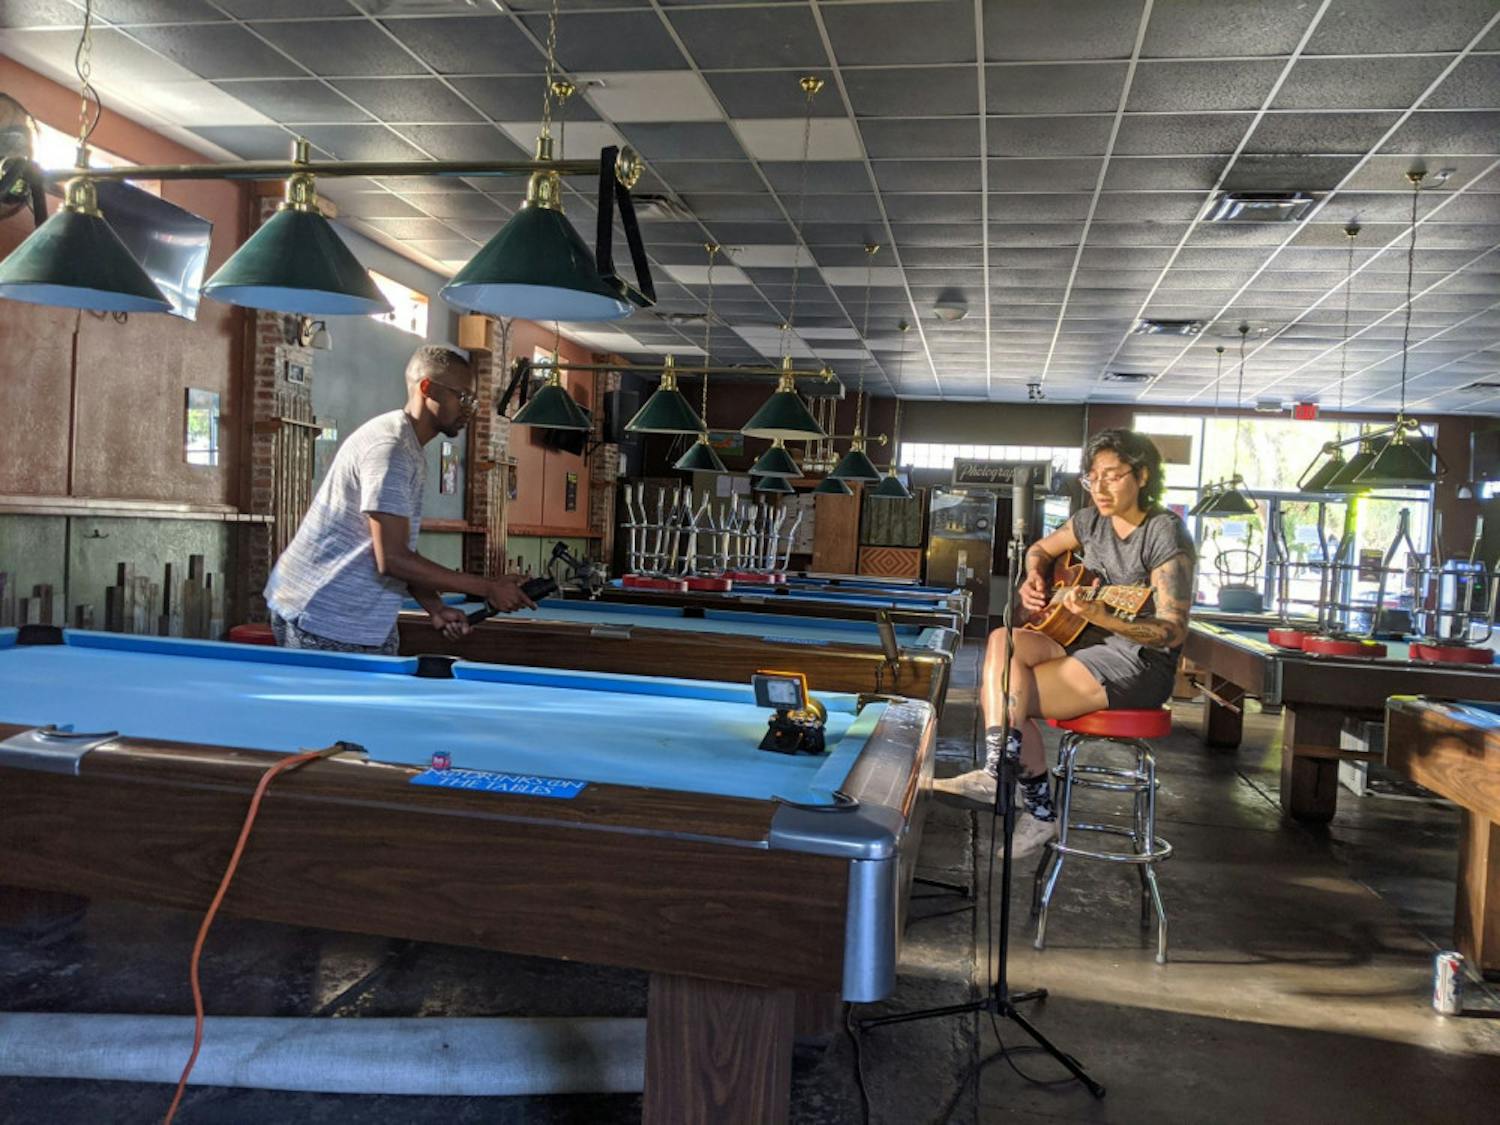 Katy Deitz performs in an empty Palomino Pool Hall. MusicGNV, a program of the non-profit organization Self Narrate, launched last month with a video series of local artists performing in their favorite locations, which have similarly been affected by COVID-19.